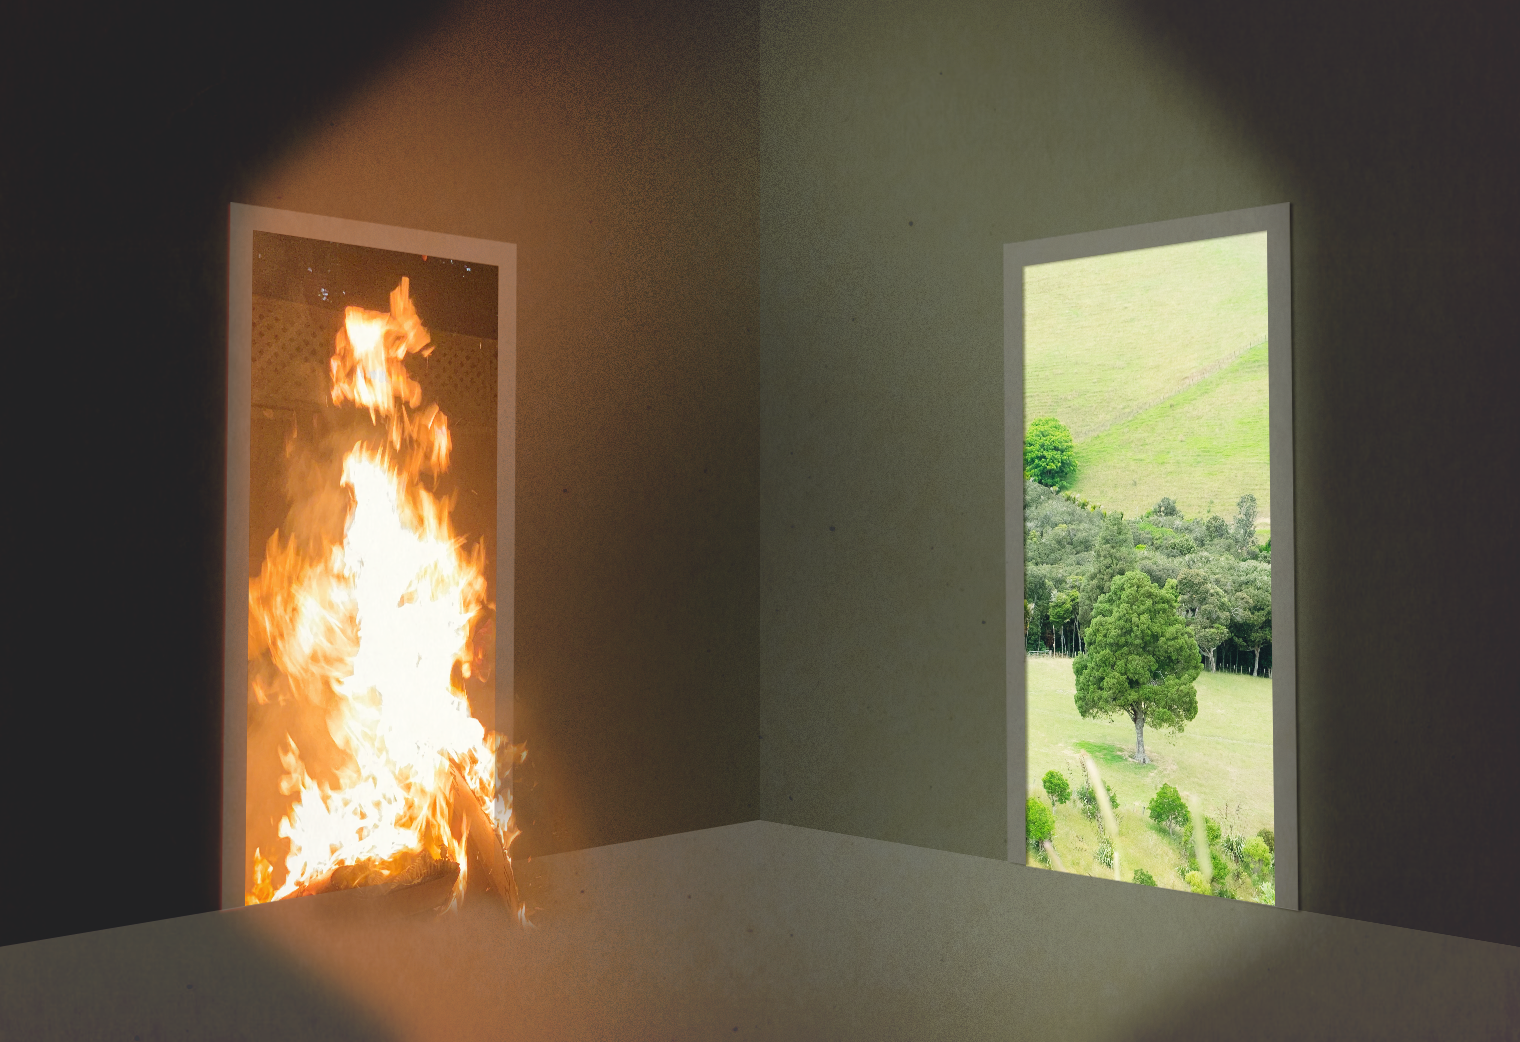 An image of two doors. The door on the left is full of flames. the doorway on the right side leads to a green meadow full of trees. Illustration by Jess Allison